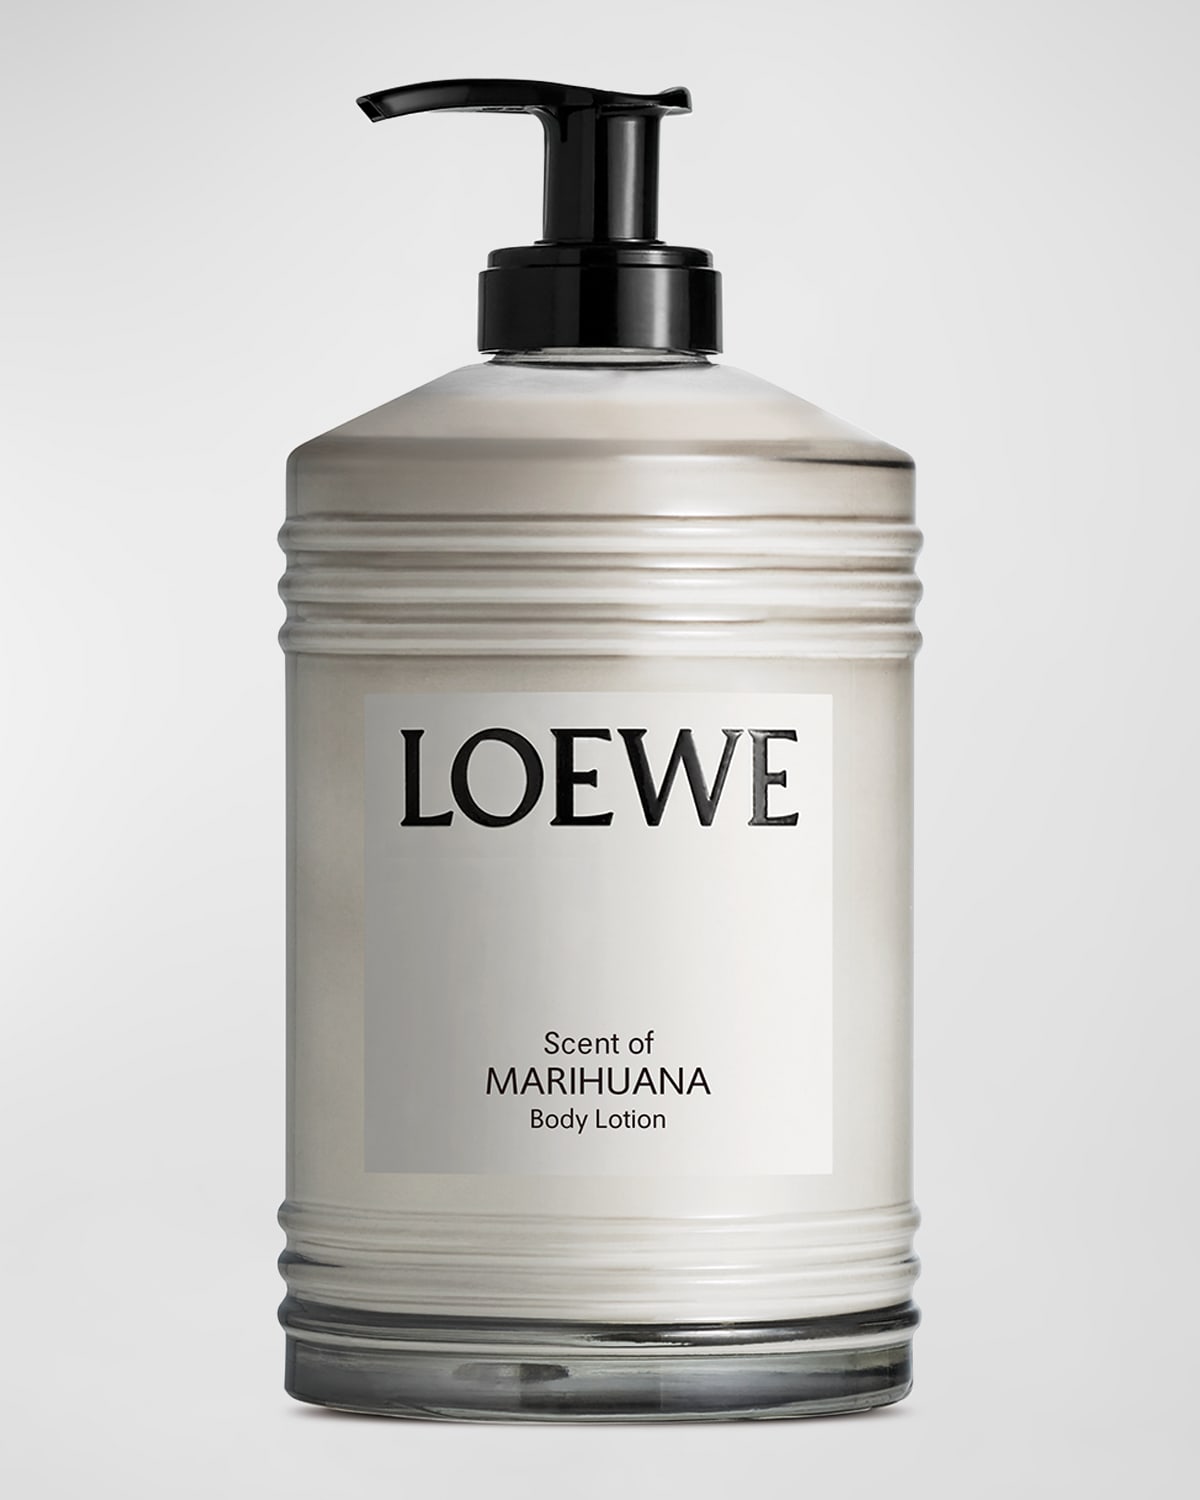 Loewe Scent Of Marihuana Body Lotion, 12 Oz. In White